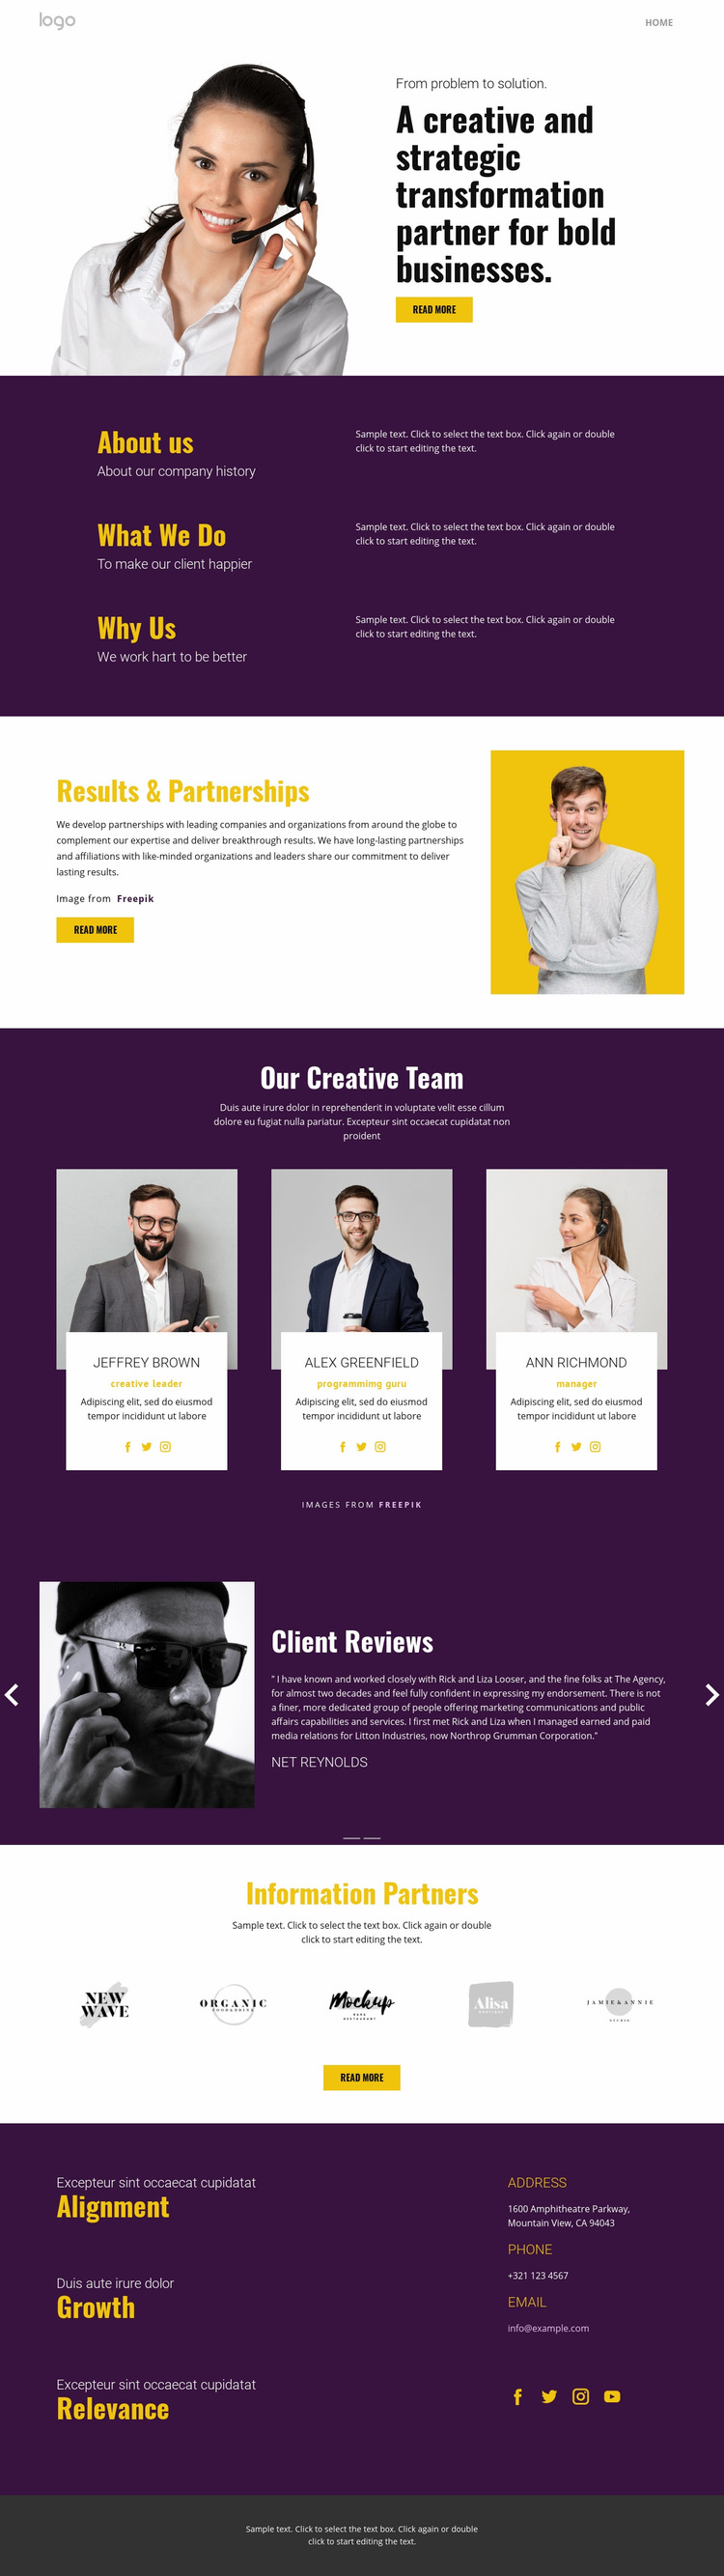 Creative strategy in business Web Page Design